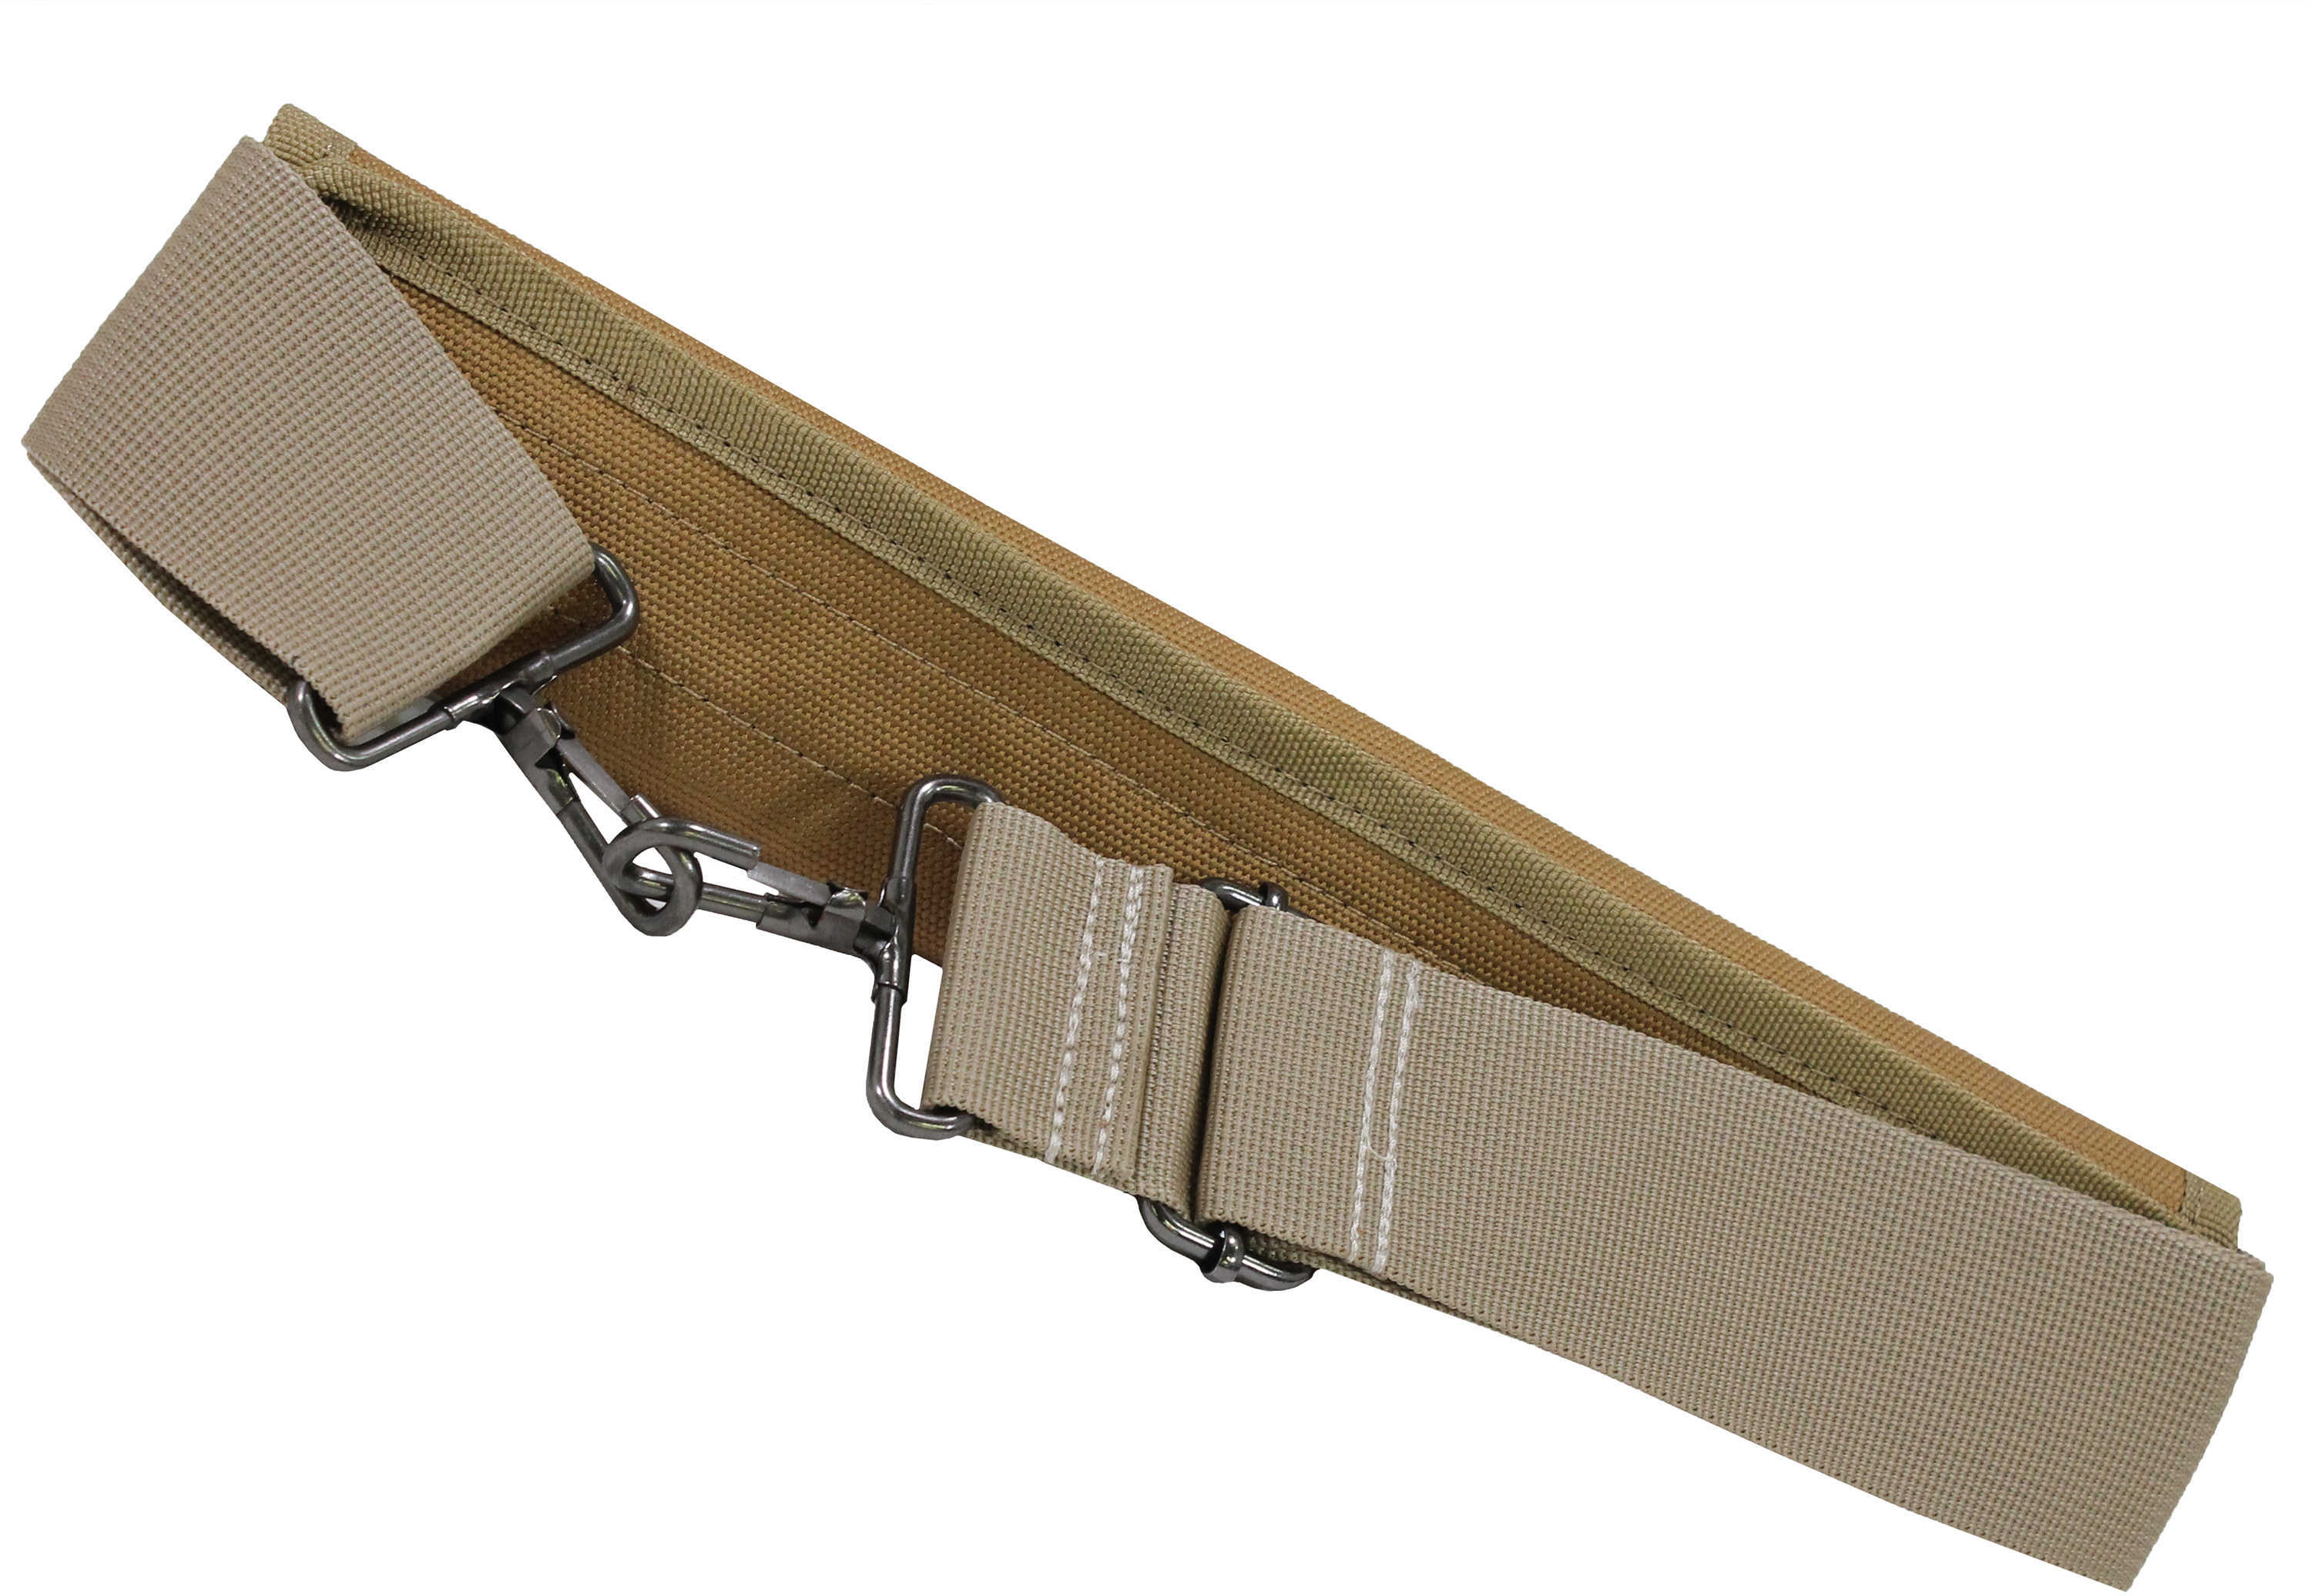 Galati Gear Padded Sling/Backpack Strap Coyote Brown Md: GLSP46CB